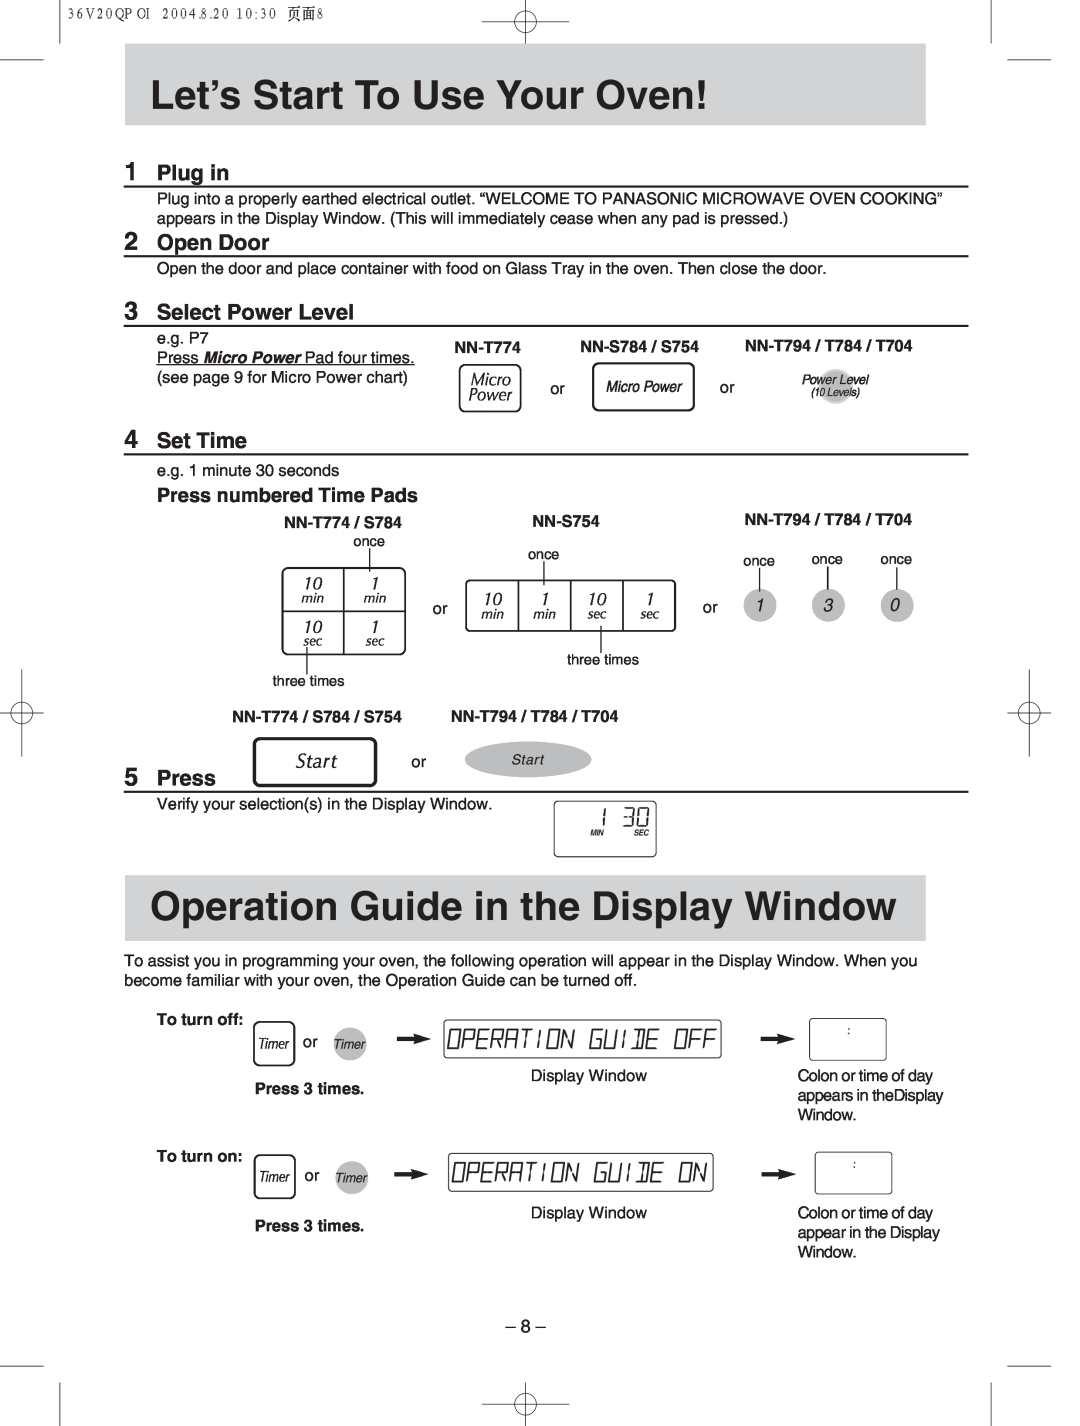 Panasonic NN-T704 h Let’s Start To Use Your Oven, Operation Guide in the Display Window, Plug in, Open Door, Set Time 